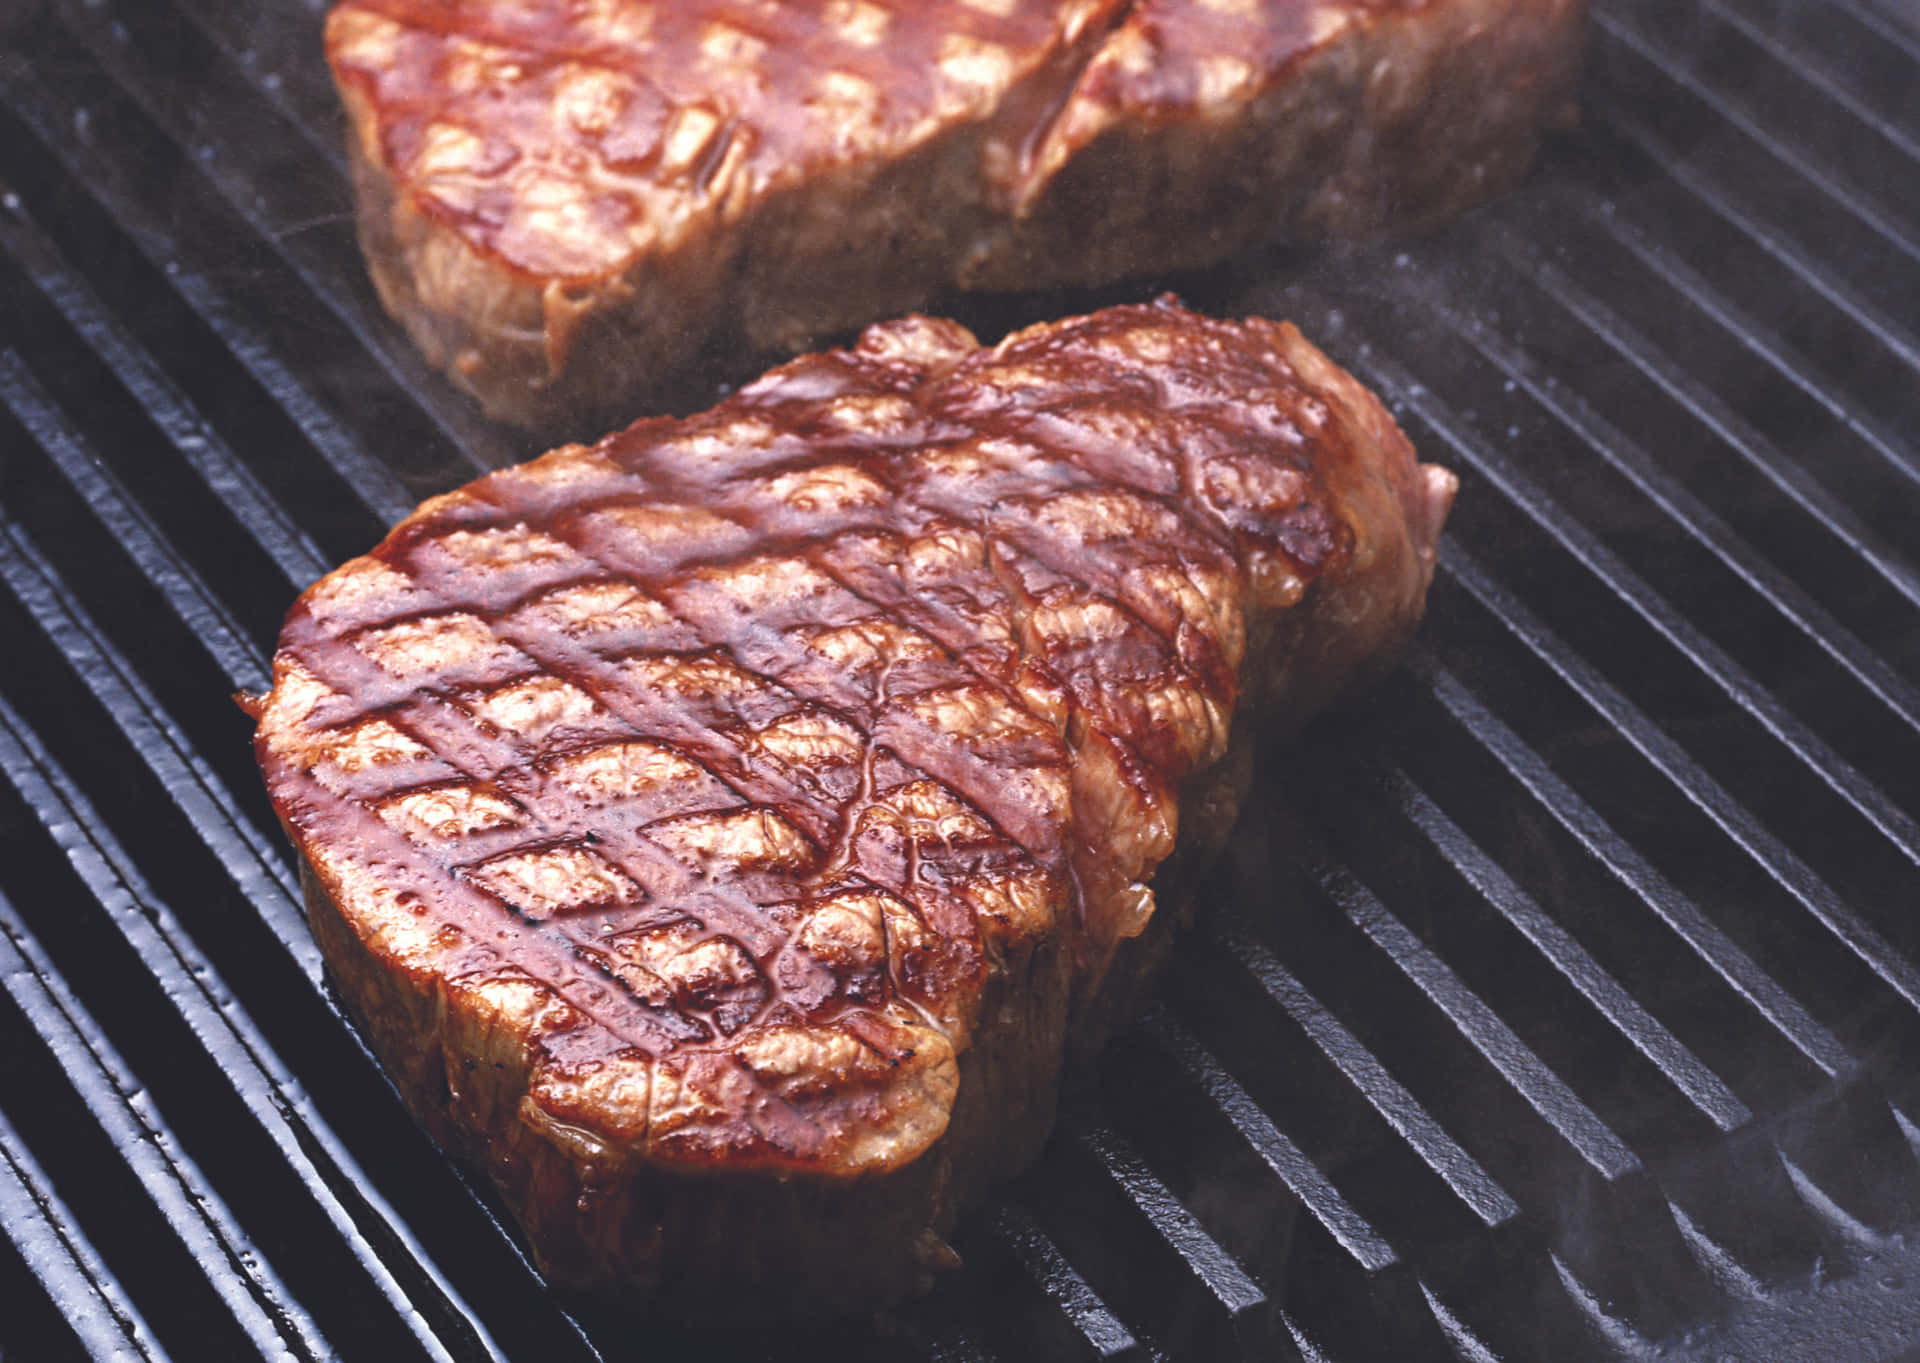 A Steak Is Being Cooked On A Grill